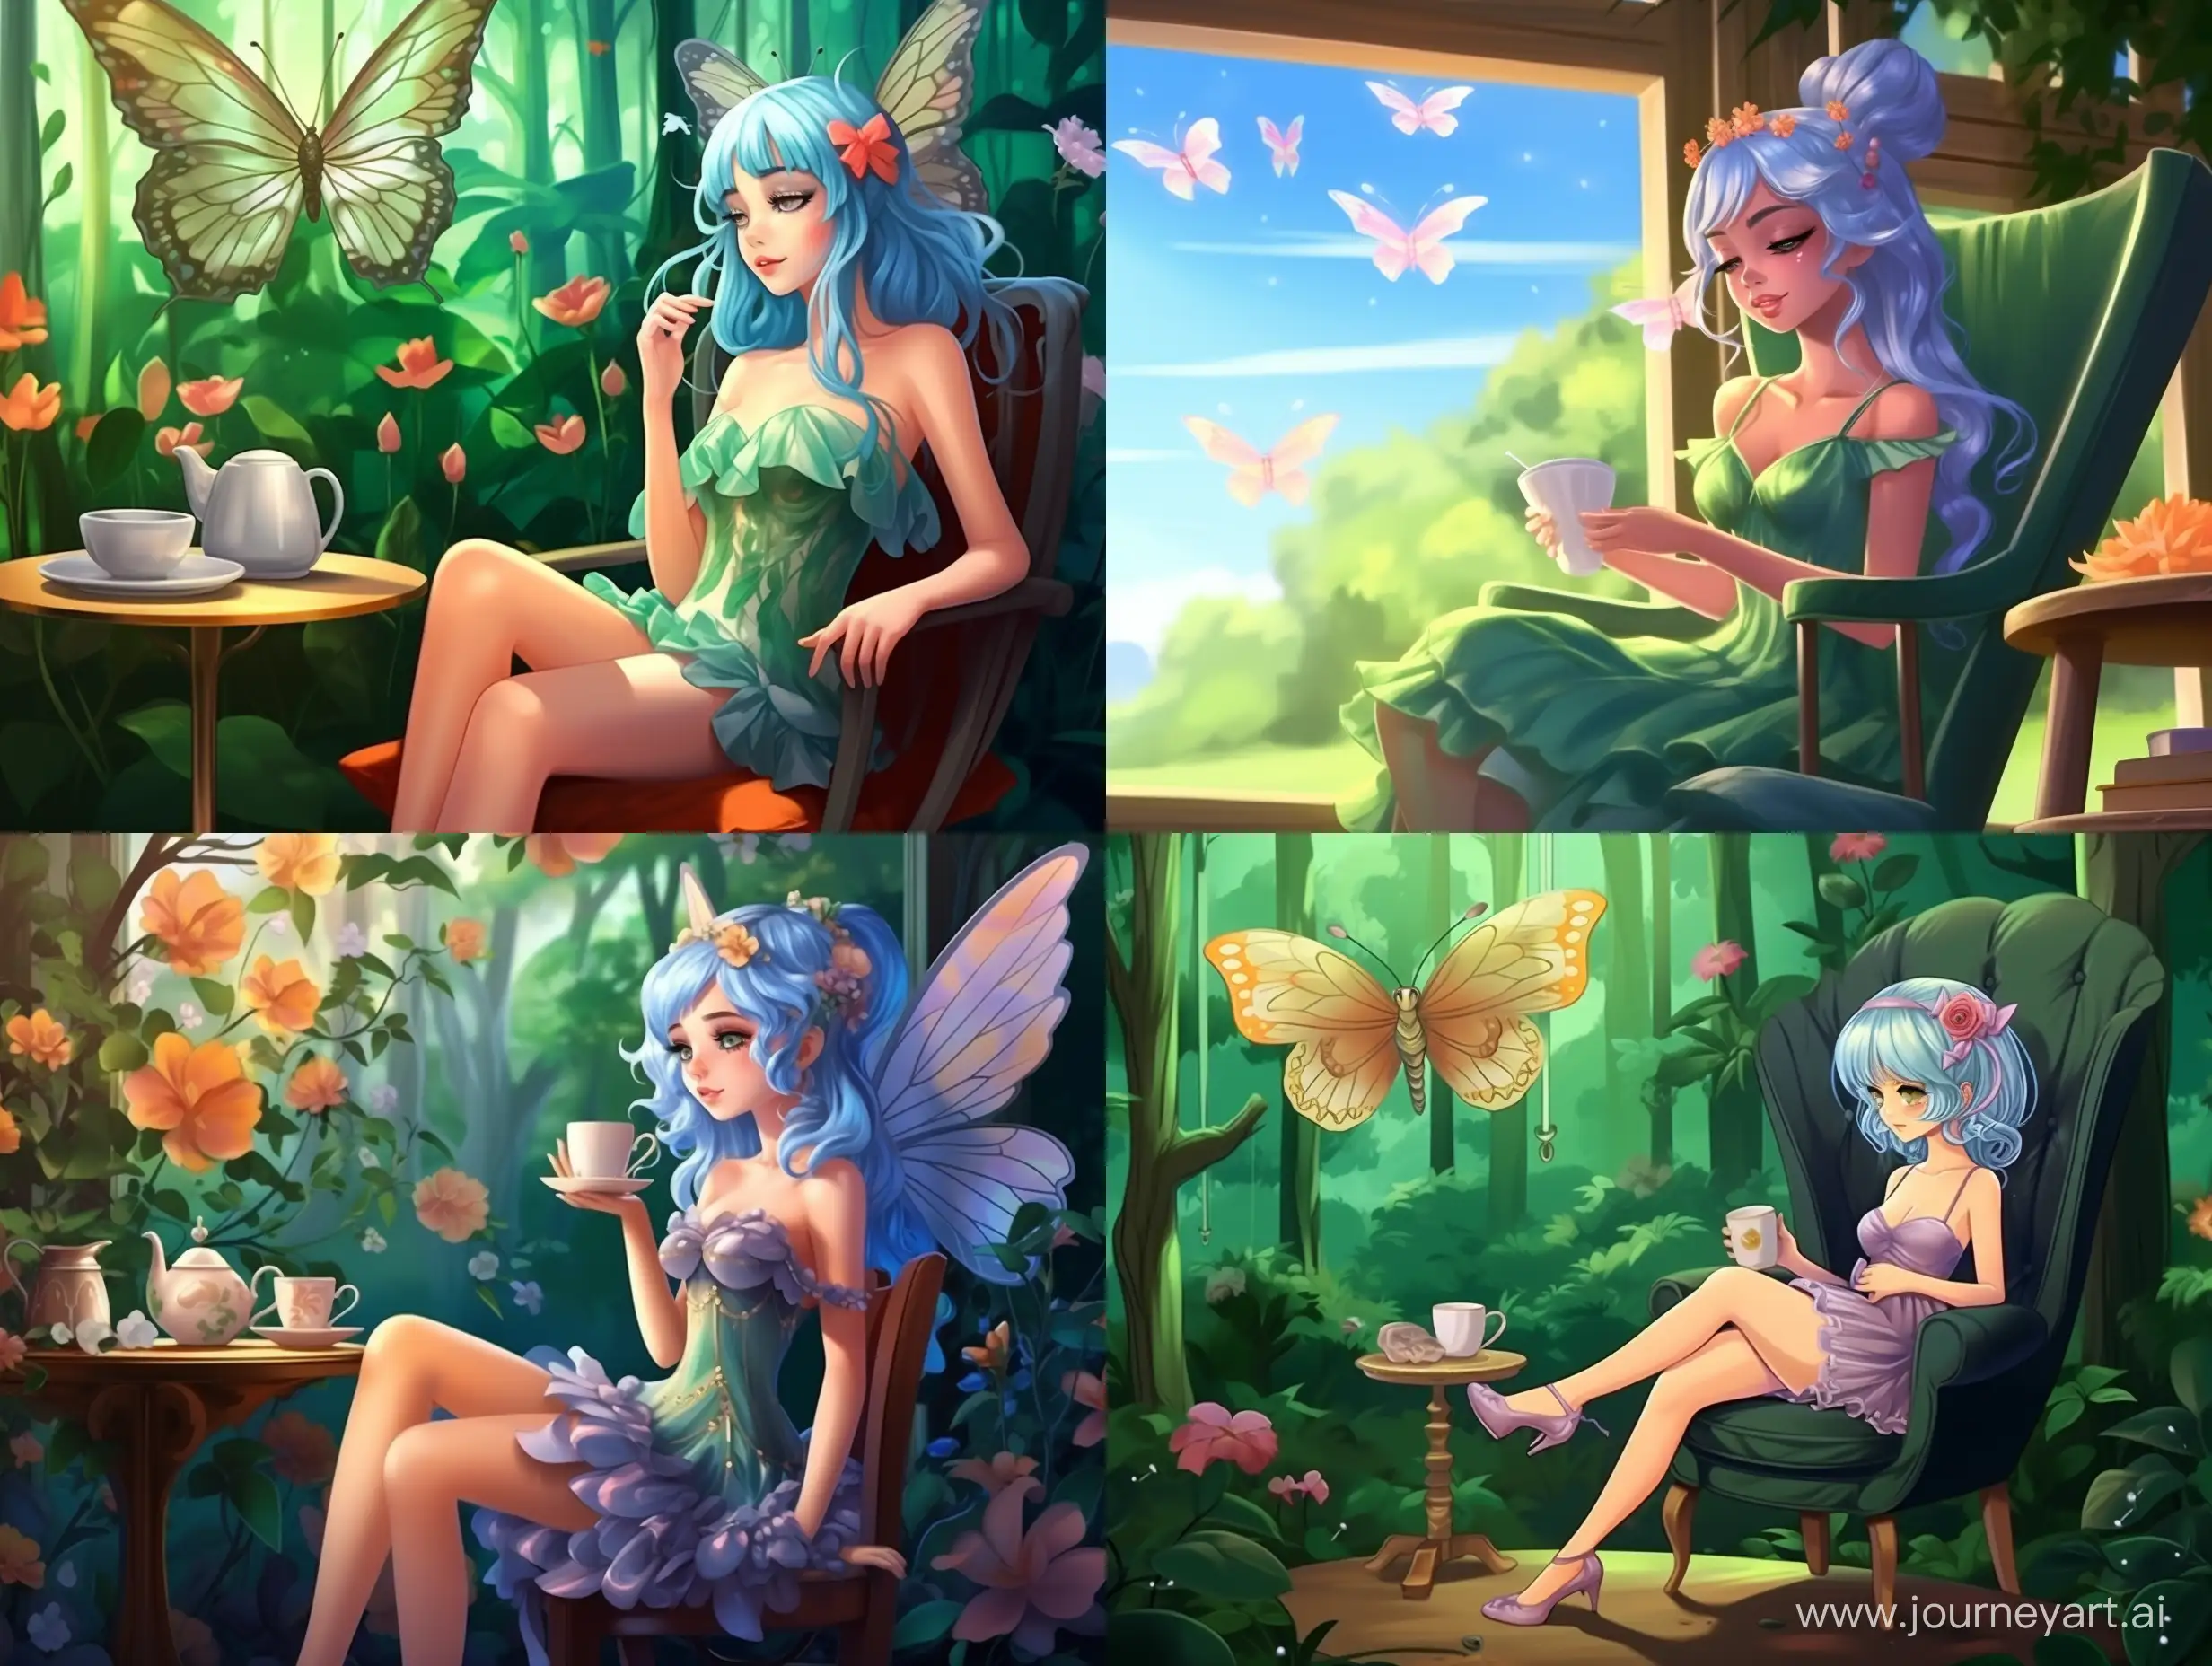 Enchanting-Anime-Scene-GreenHaired-Fairy-Sipping-Tea-in-a-Morning-Forest-Glade